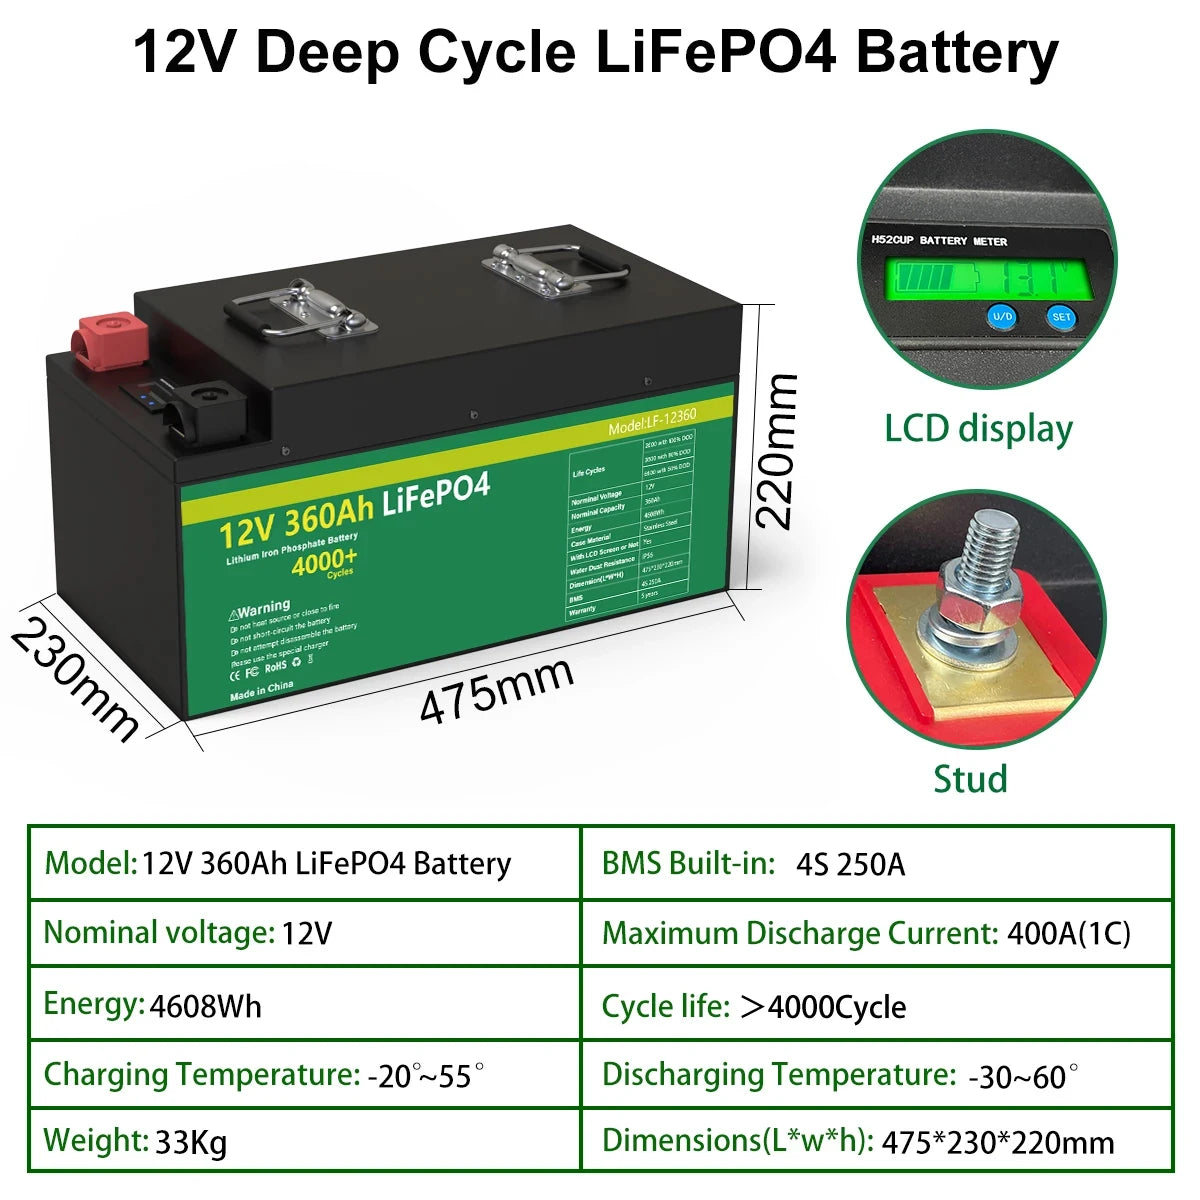 12V LiFePO4 Battery Pack: High-performance battery with built-in BMS and LCD display.